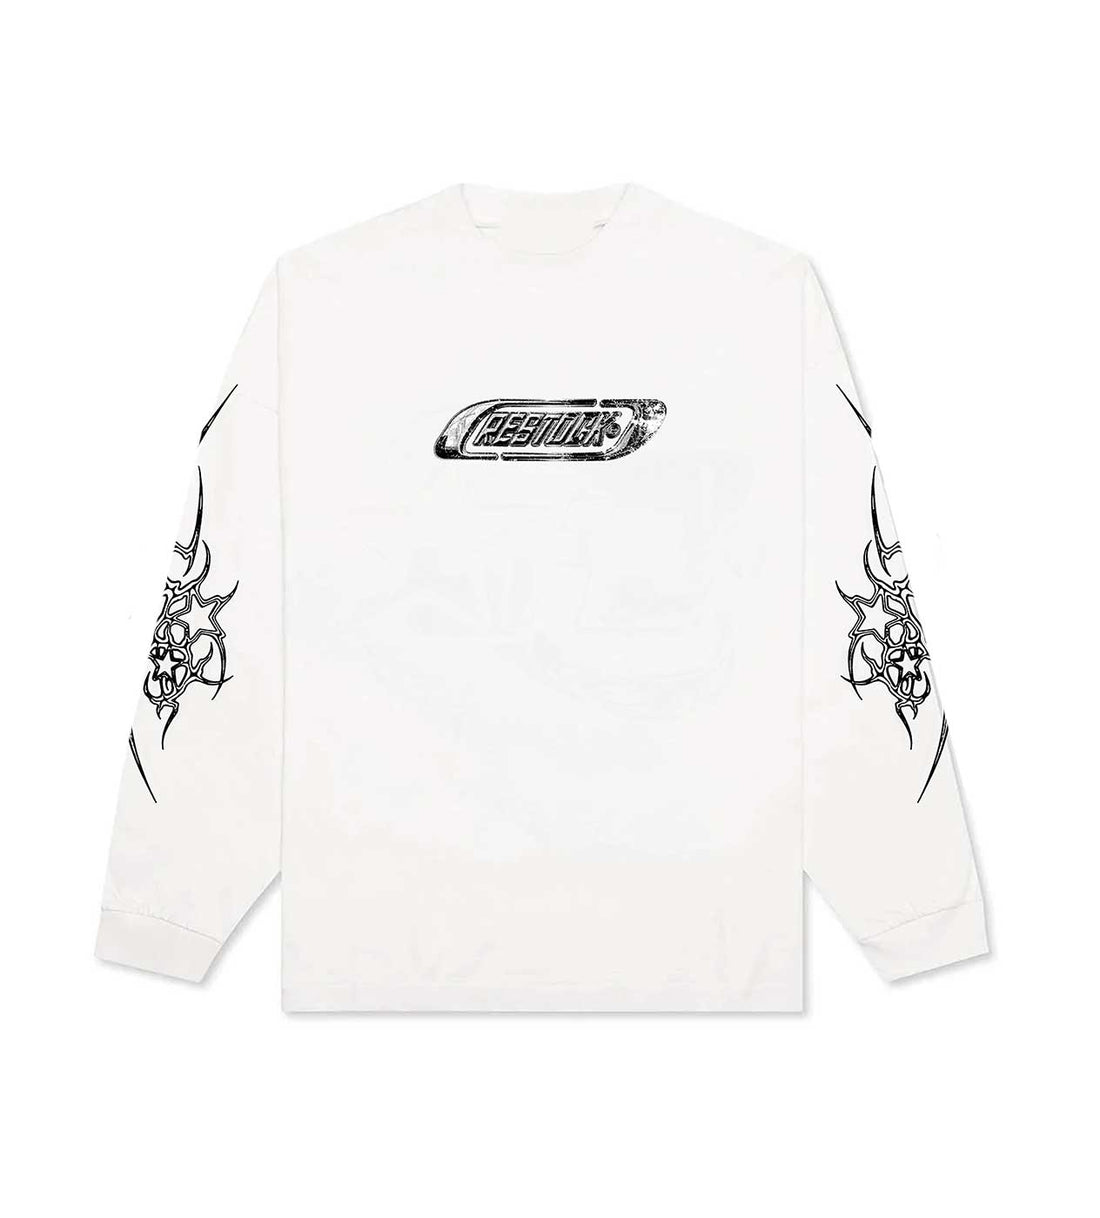 Restock AR Chrome White Long Sleeve Tee Front View